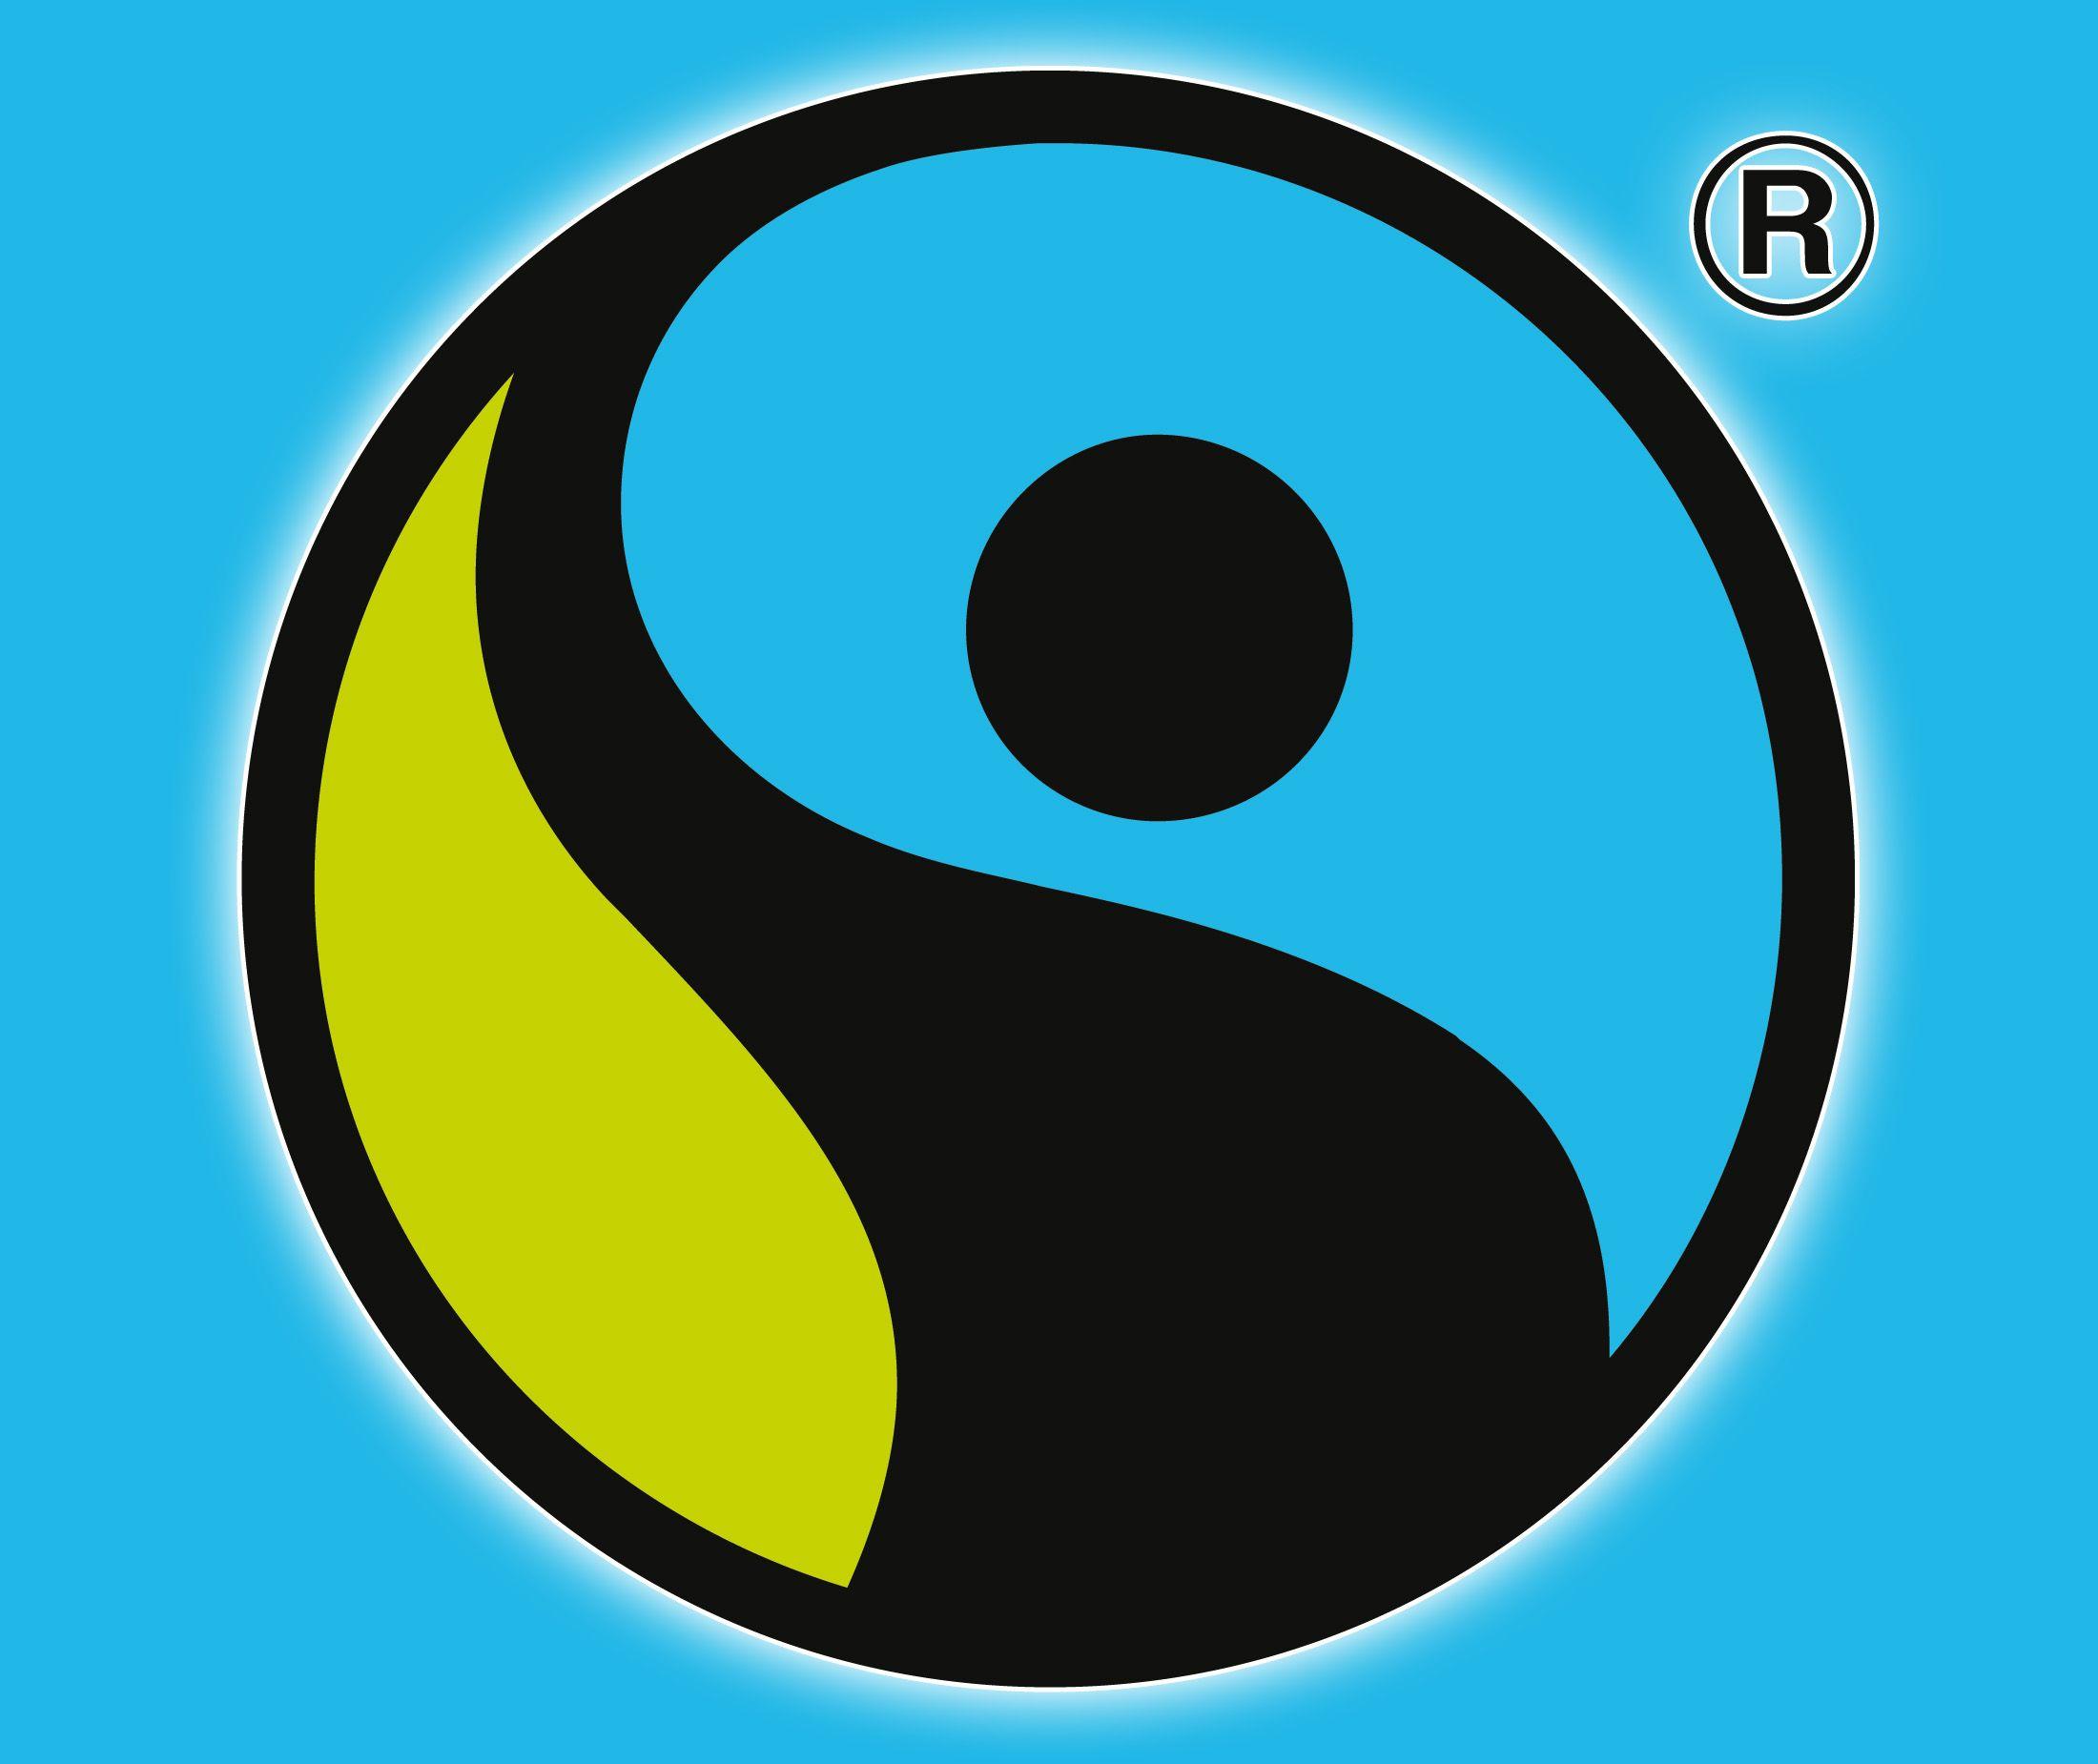 Blue Green and Black Logo - Fairtrade Logo, Fairtrade Symbol, Meaning, History and Evolution